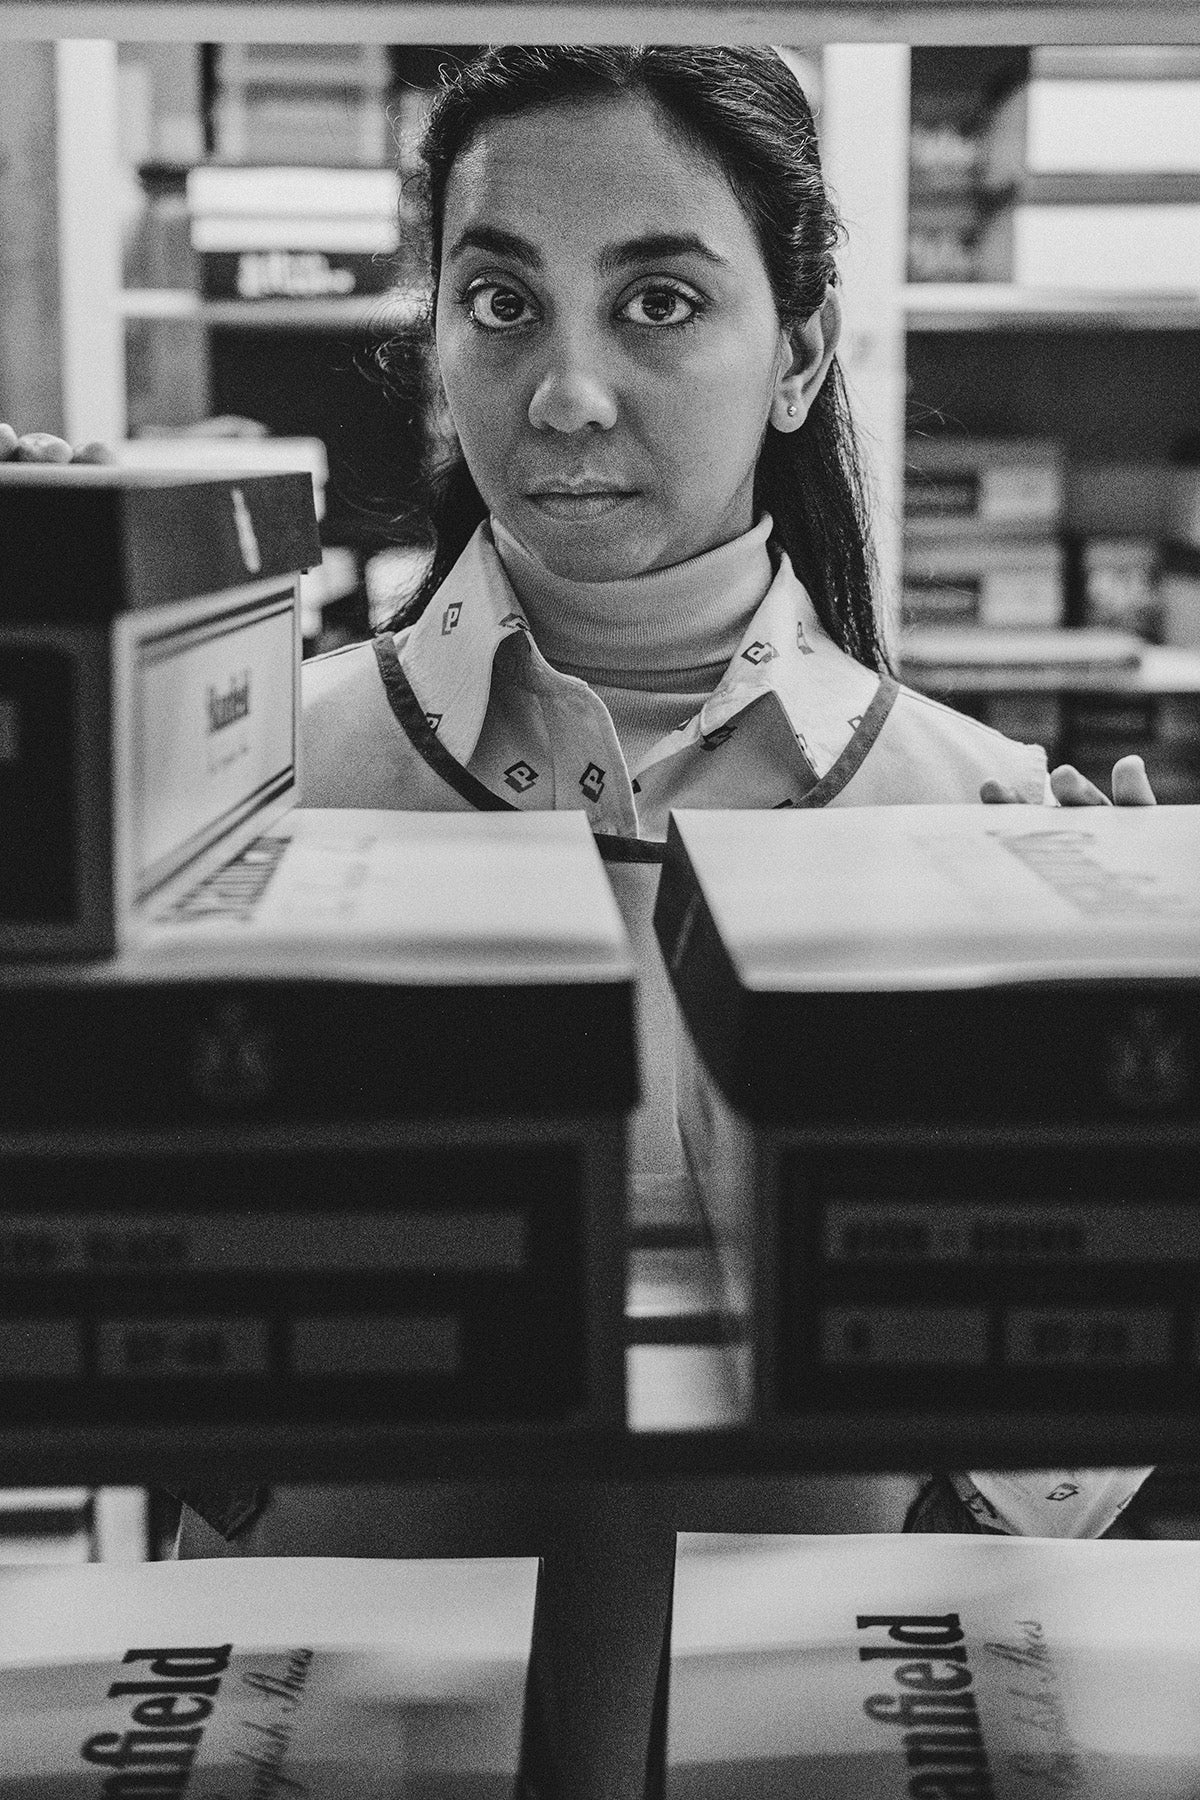 Black and white photograph by David Hurn showing Black Mirror star Anjana Vasan wearing a bib, a collared shirt, and her long hair pinned back, looking at the camera over the top of boxes of files